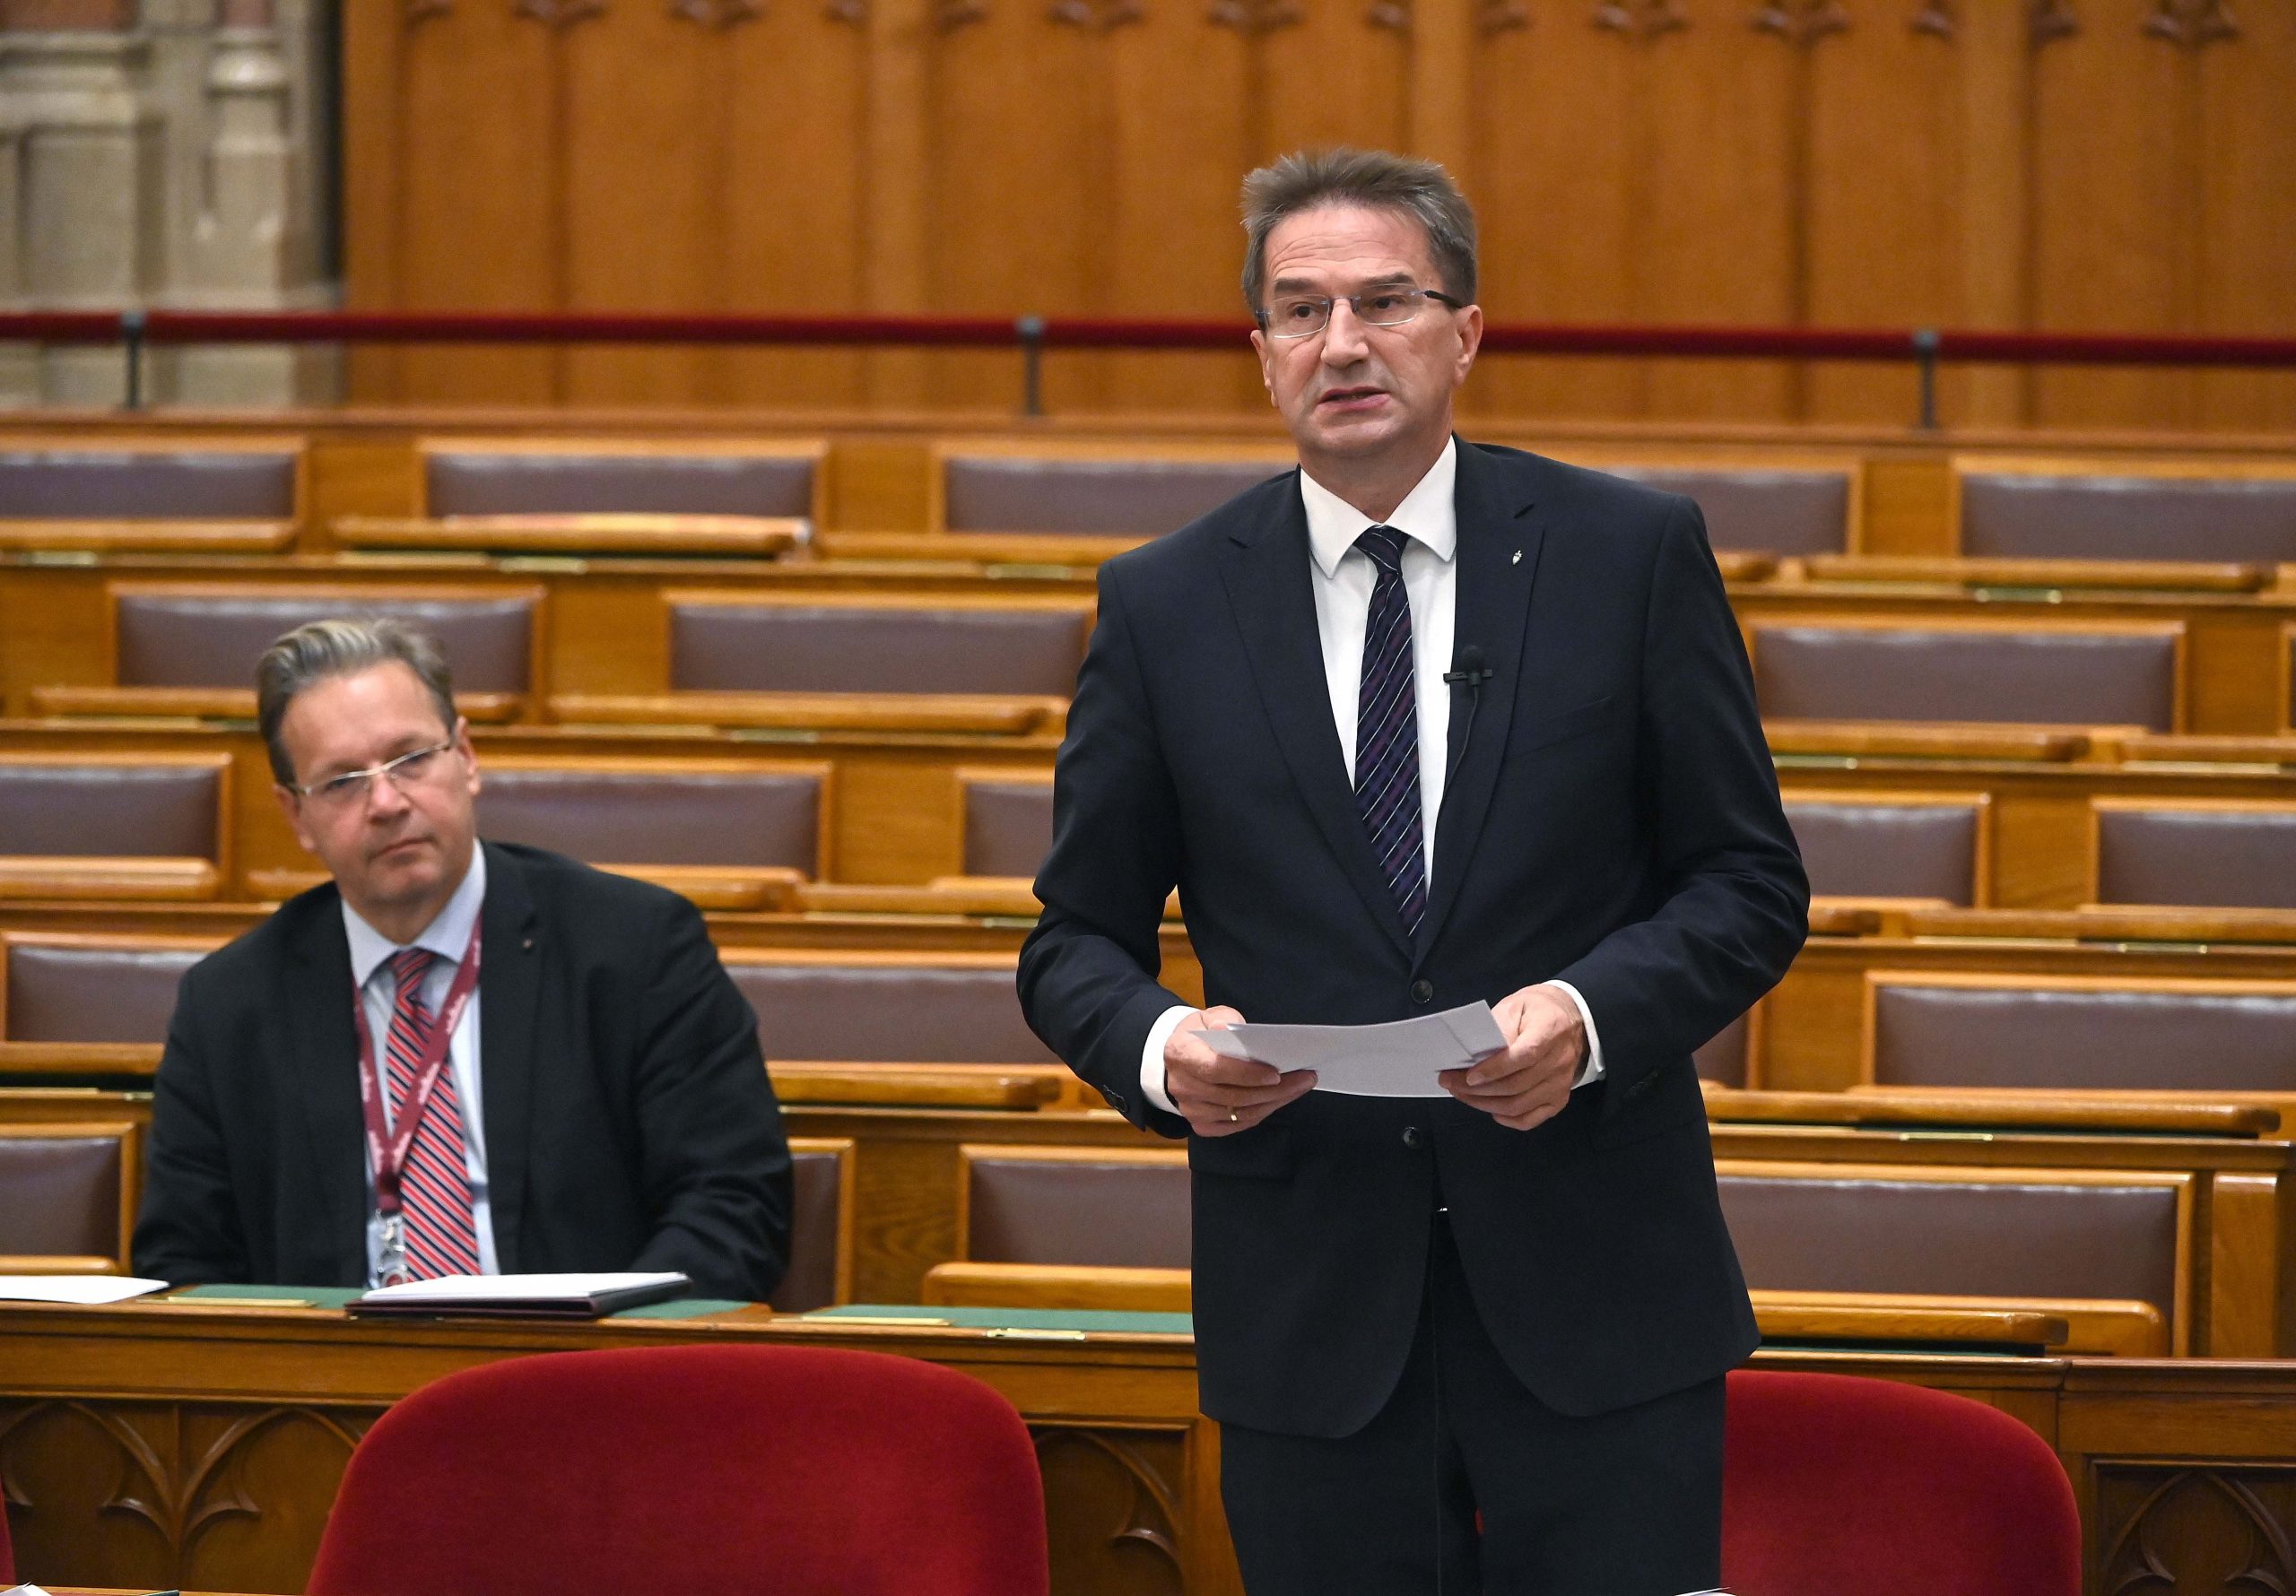 Detailed Charges against Fidesz MP Völner Published as Parliament Lifts His Immunity